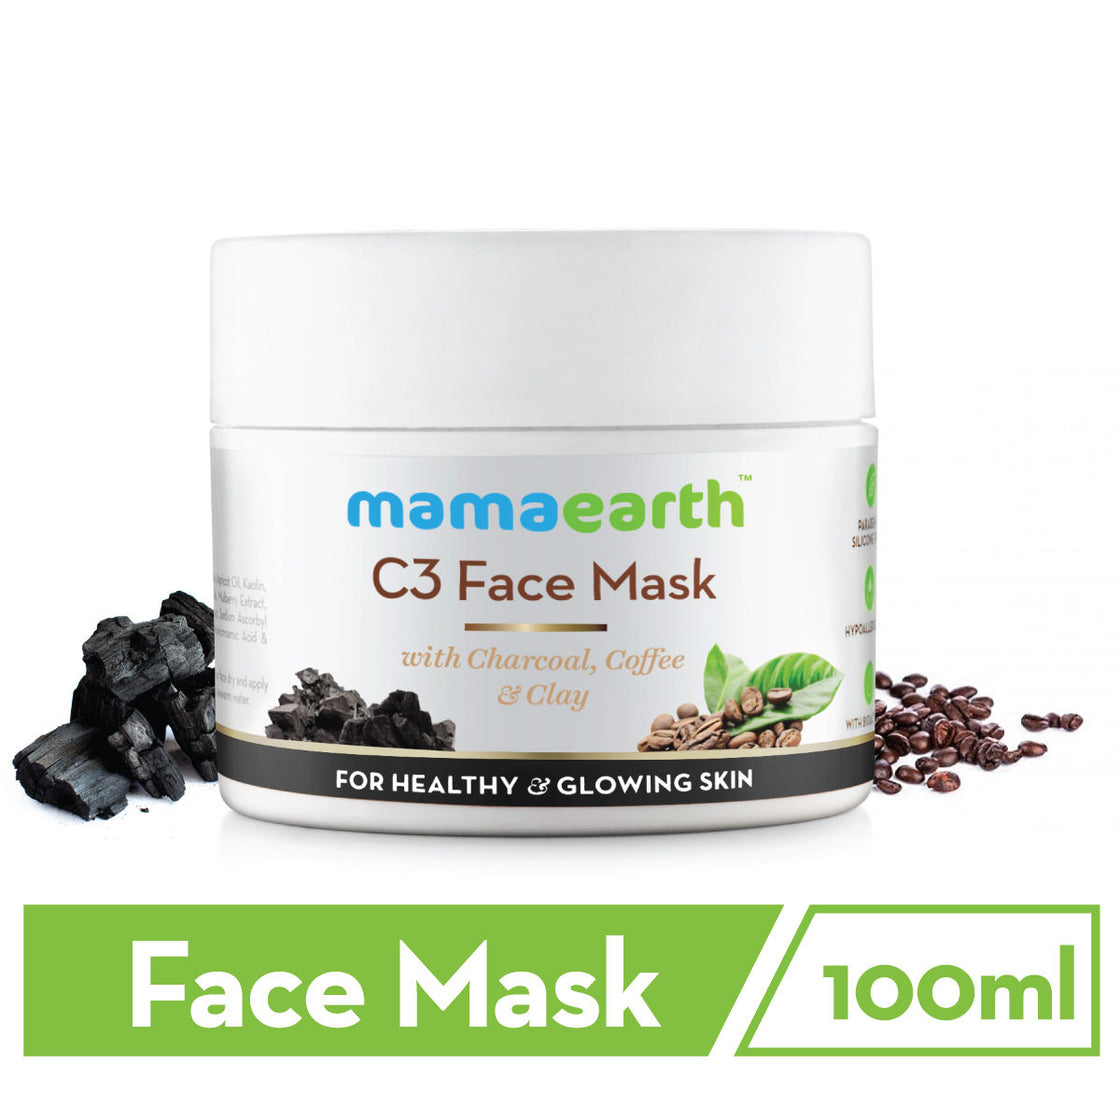 Mamaearth C3 Face Mask With Charcoal, Coffee & Clay